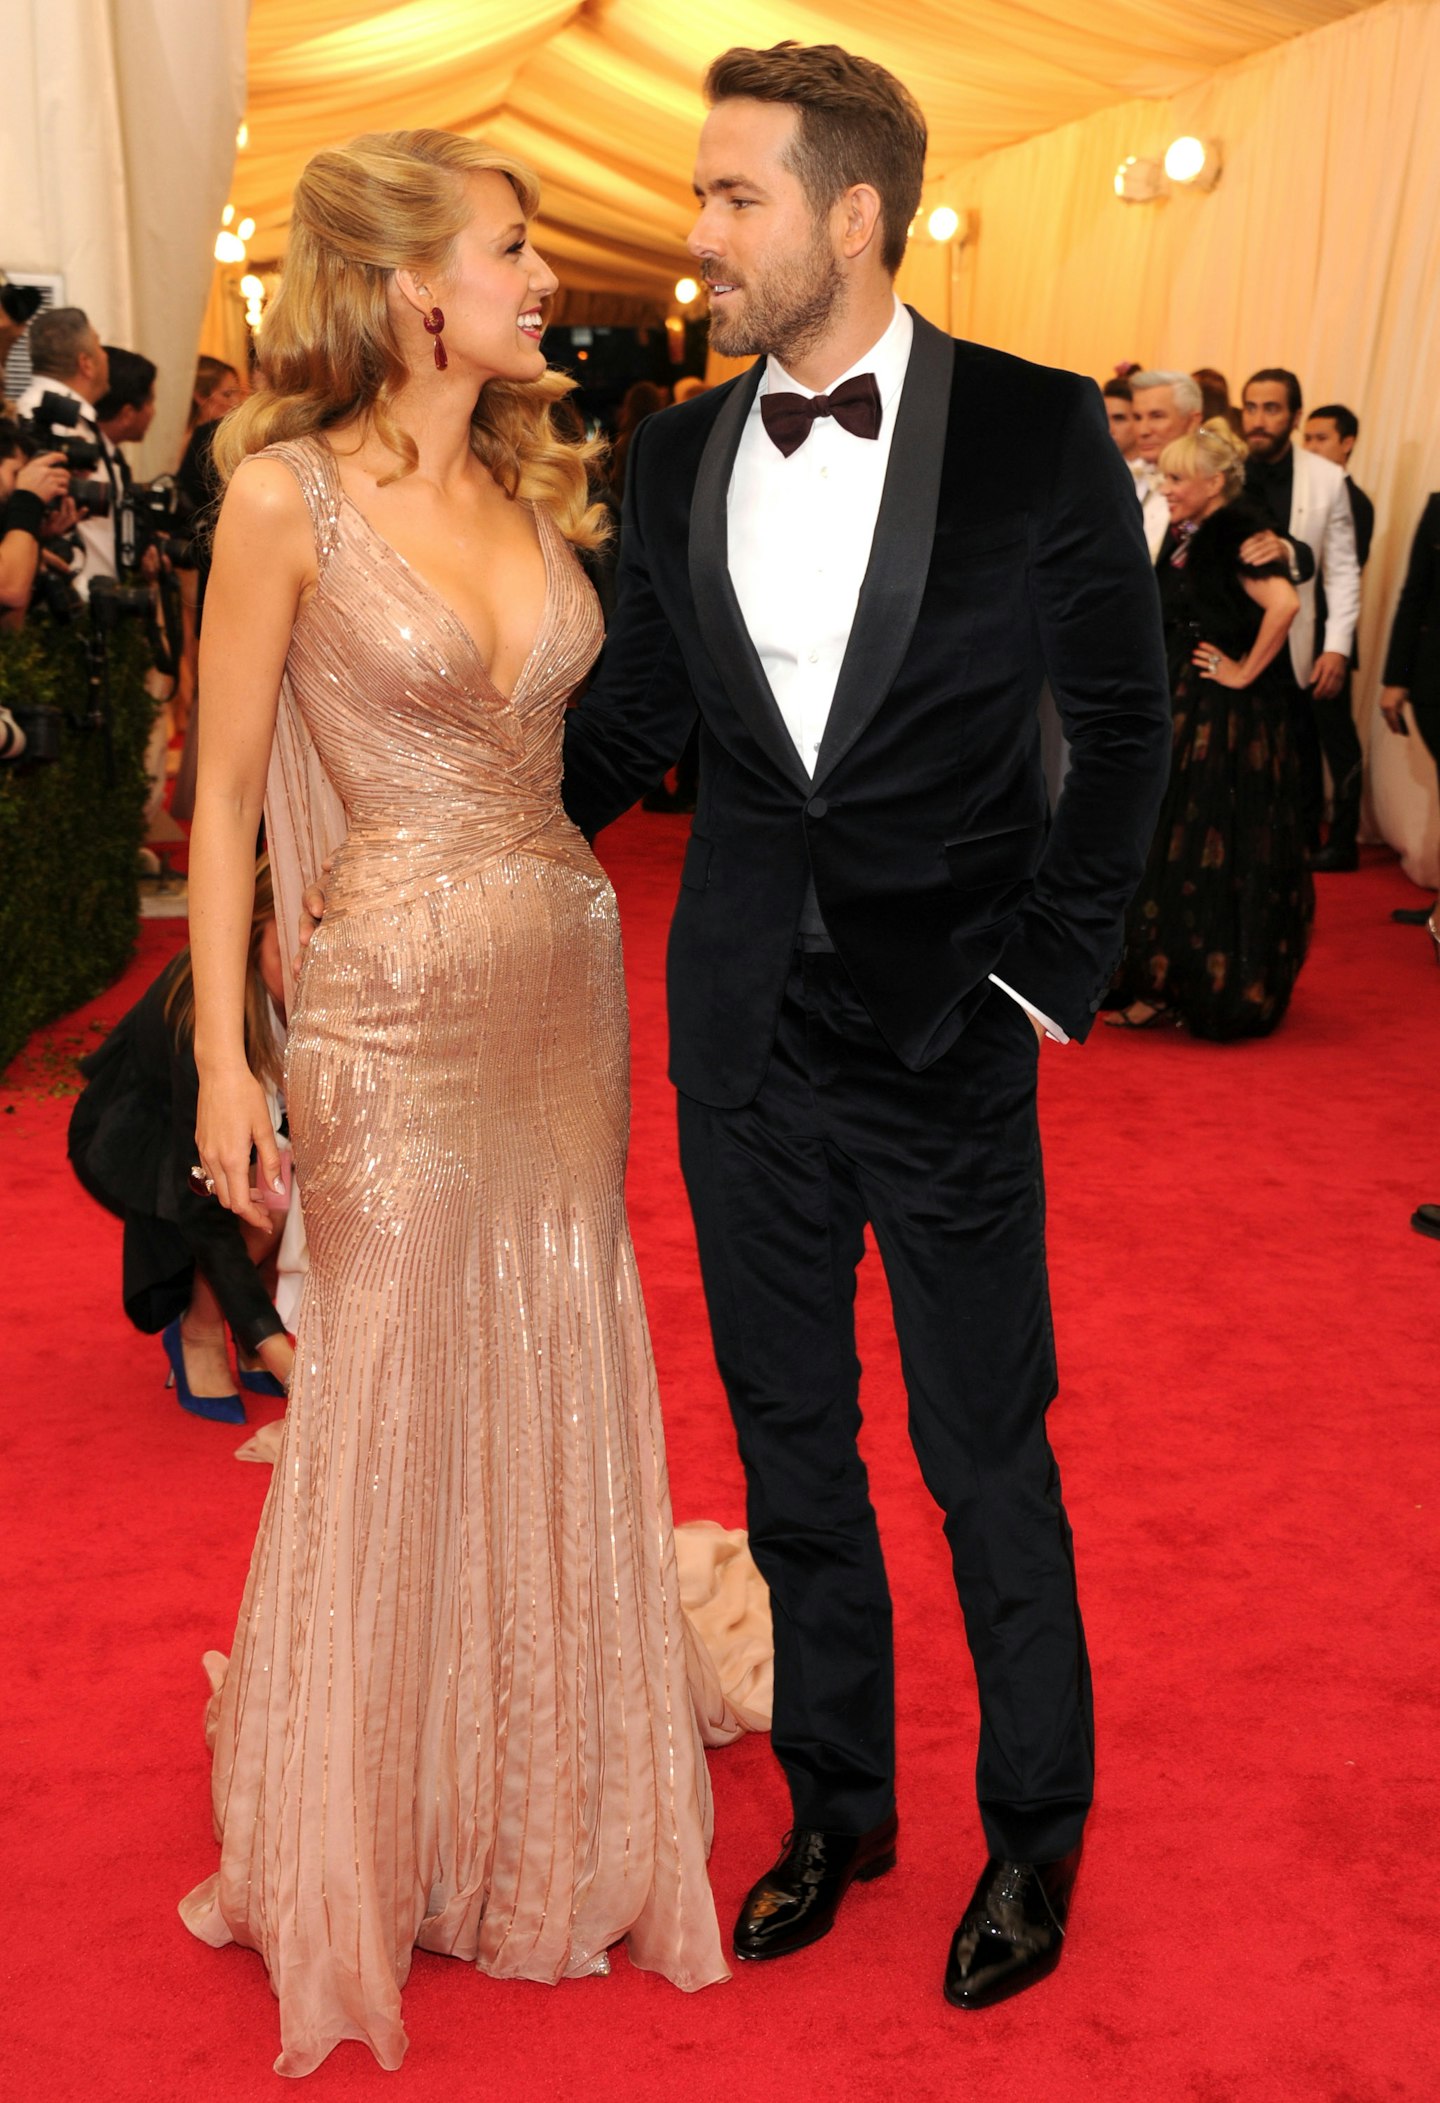 Blake Lively and Ryan Reynolds attend the "Charles James: Beyond Fashion" Costume Institute Gala at the Metropolitan Museum of Art on May 5, 2014 in New York City